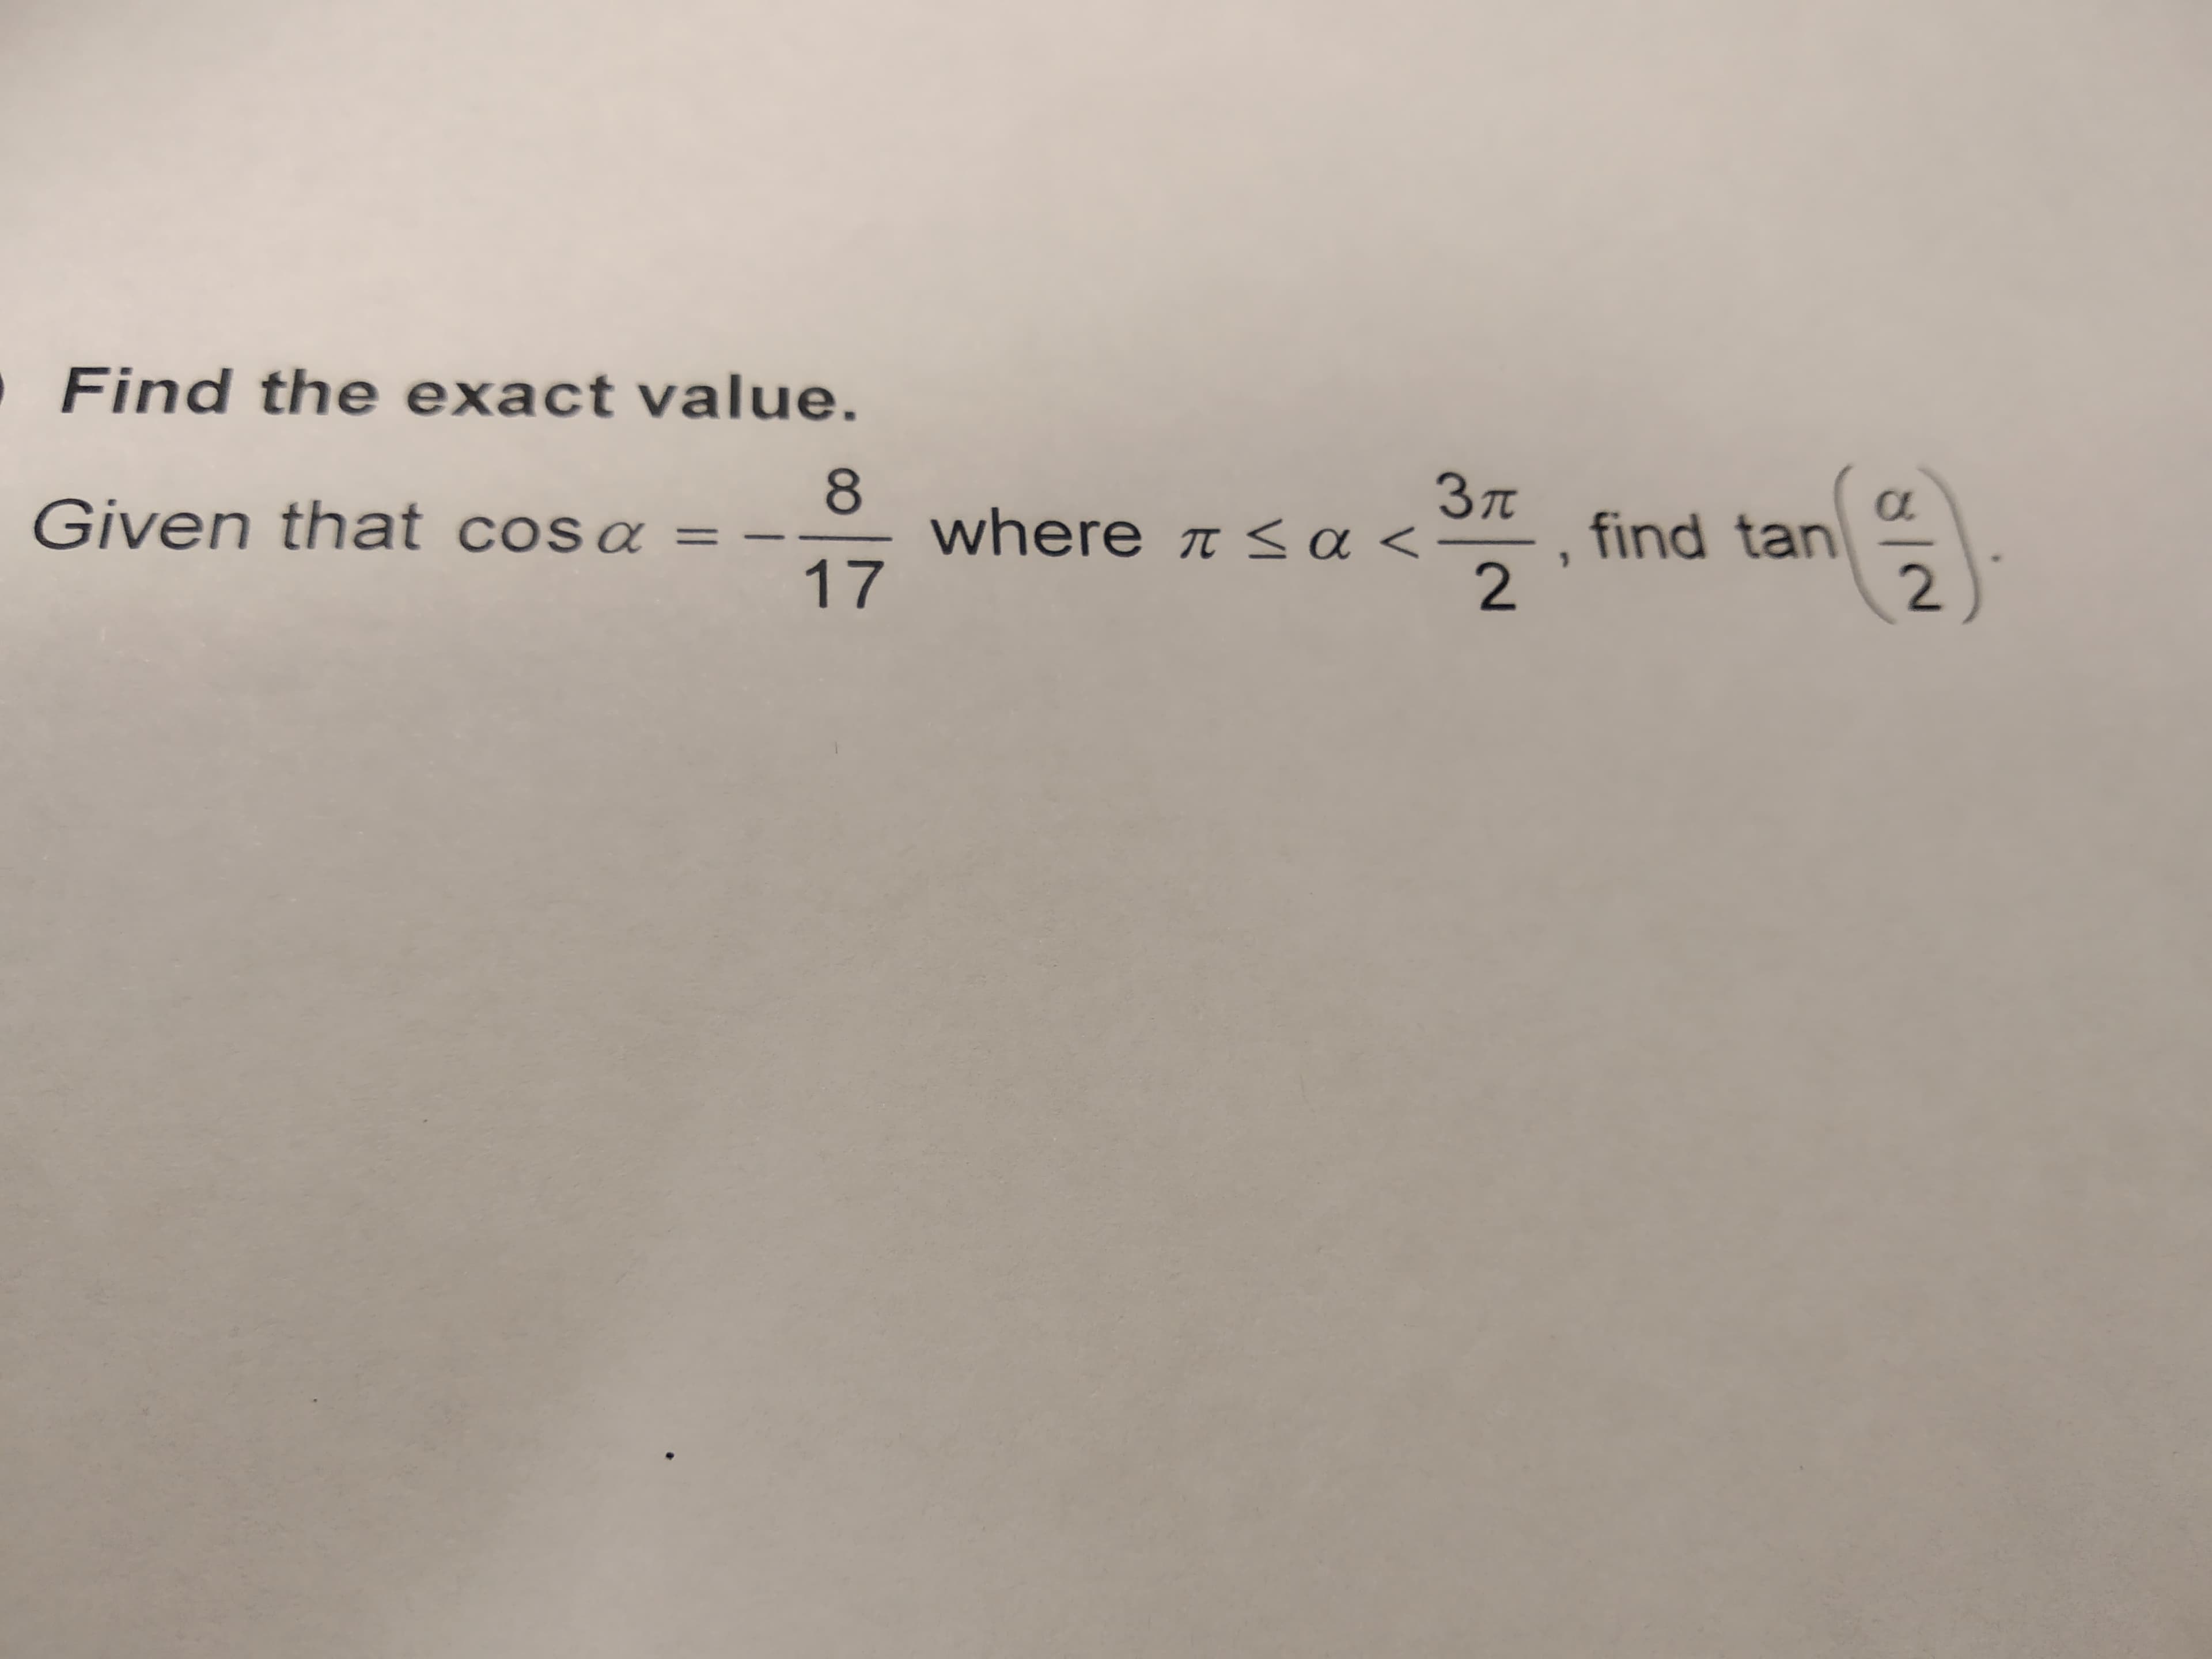 Find the exact value.
37T find tan
8
17
97
, find tan
where π α <
Given that cos α
2
--
2
